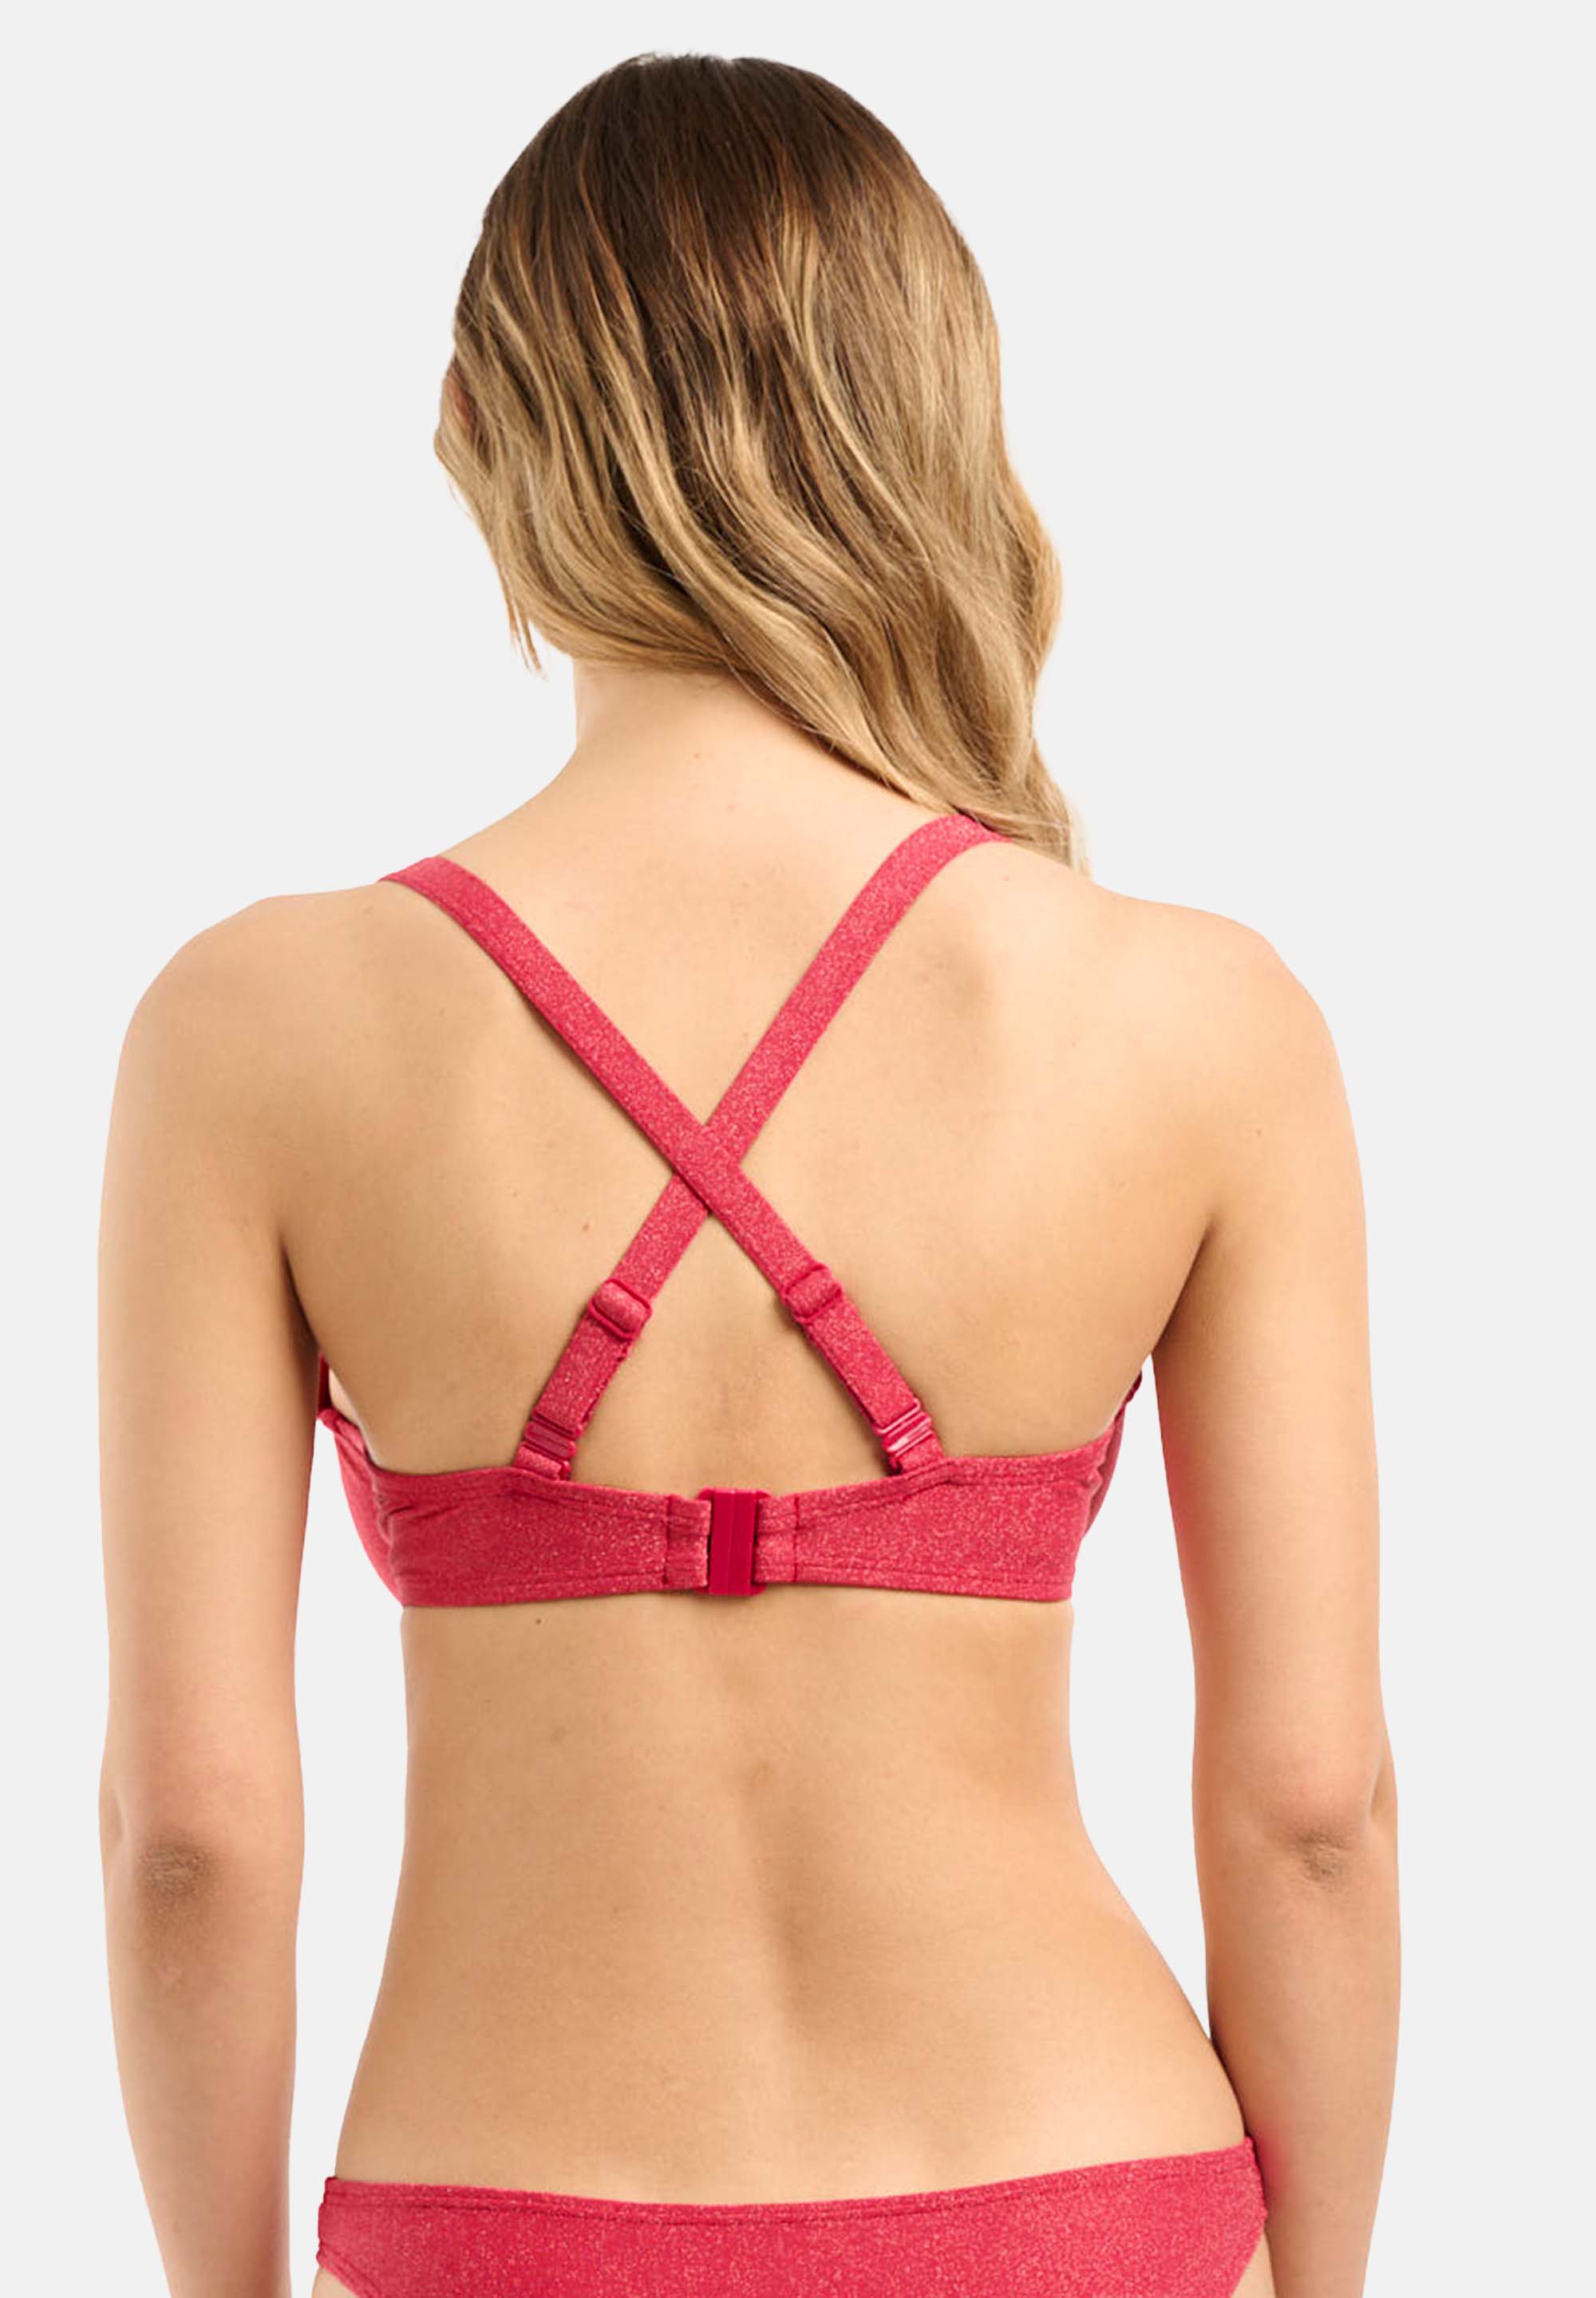 Reflet Cerise underwired swimsuit top